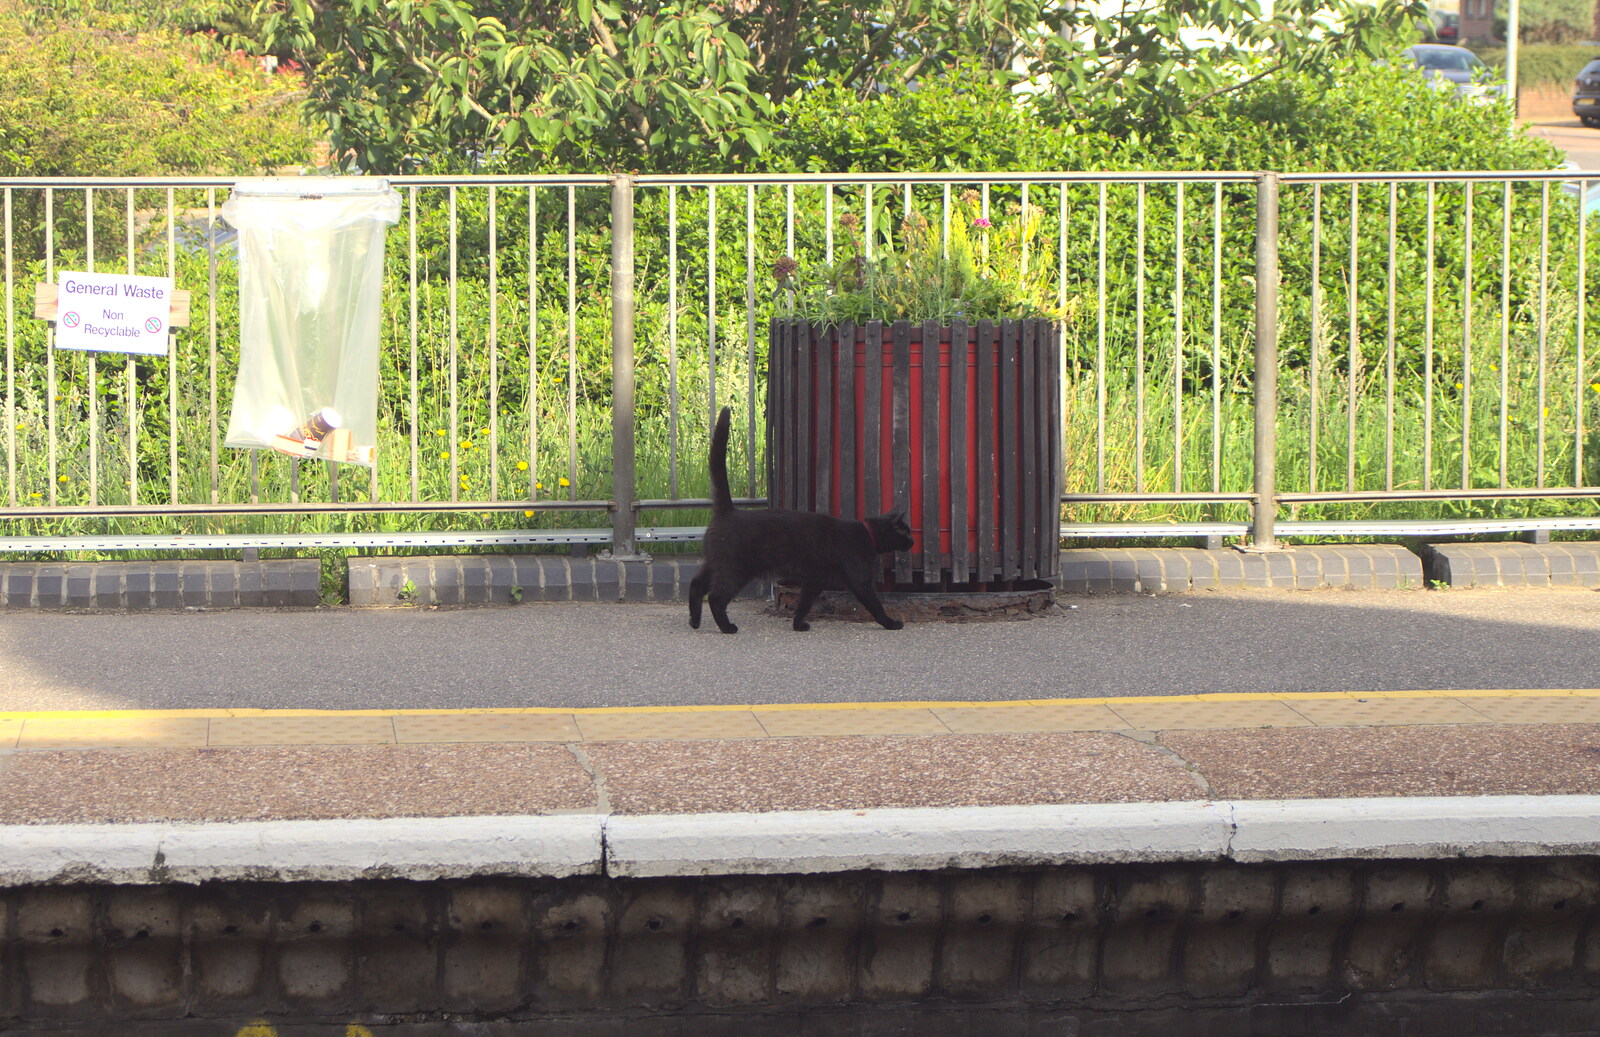 Station Cat is out and about at Diss Station from Lunch in Amandines and Southwark Graffiti, London and Diss - 15th August 2012